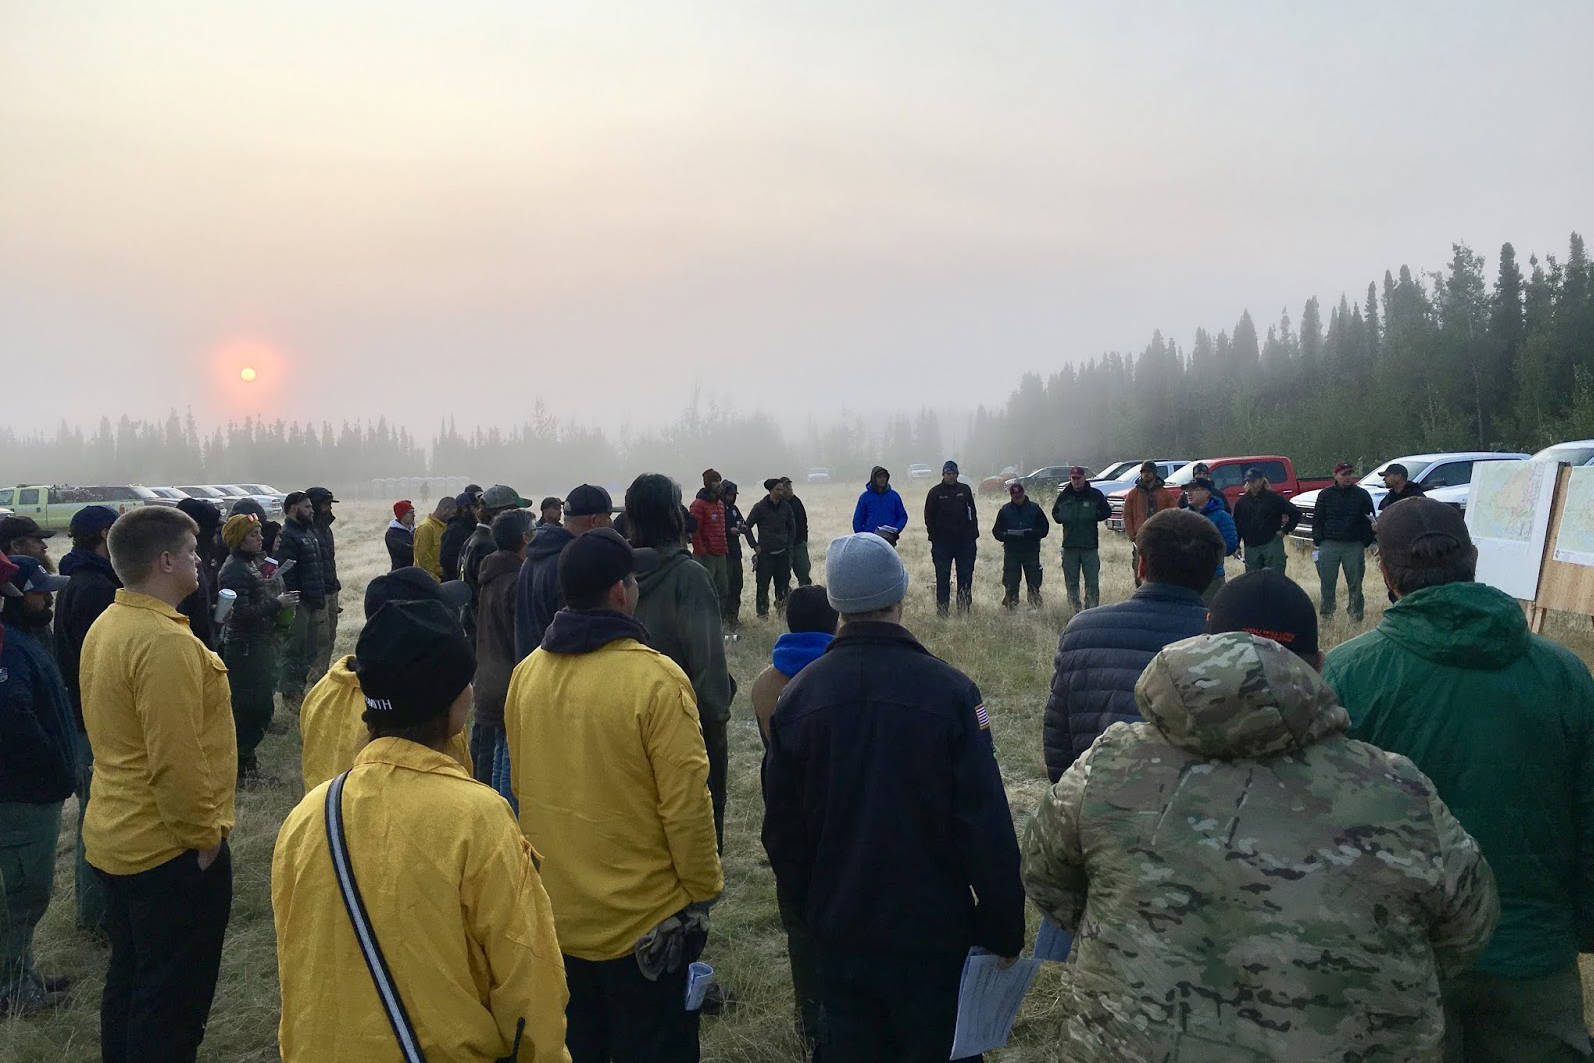 Fire crews are briefed on the day’s operations at the Otter Creek Spike Camp on Aug. 21, 2019. (Courtesy Kenai Peninsula Borough Office of Emergency Management)